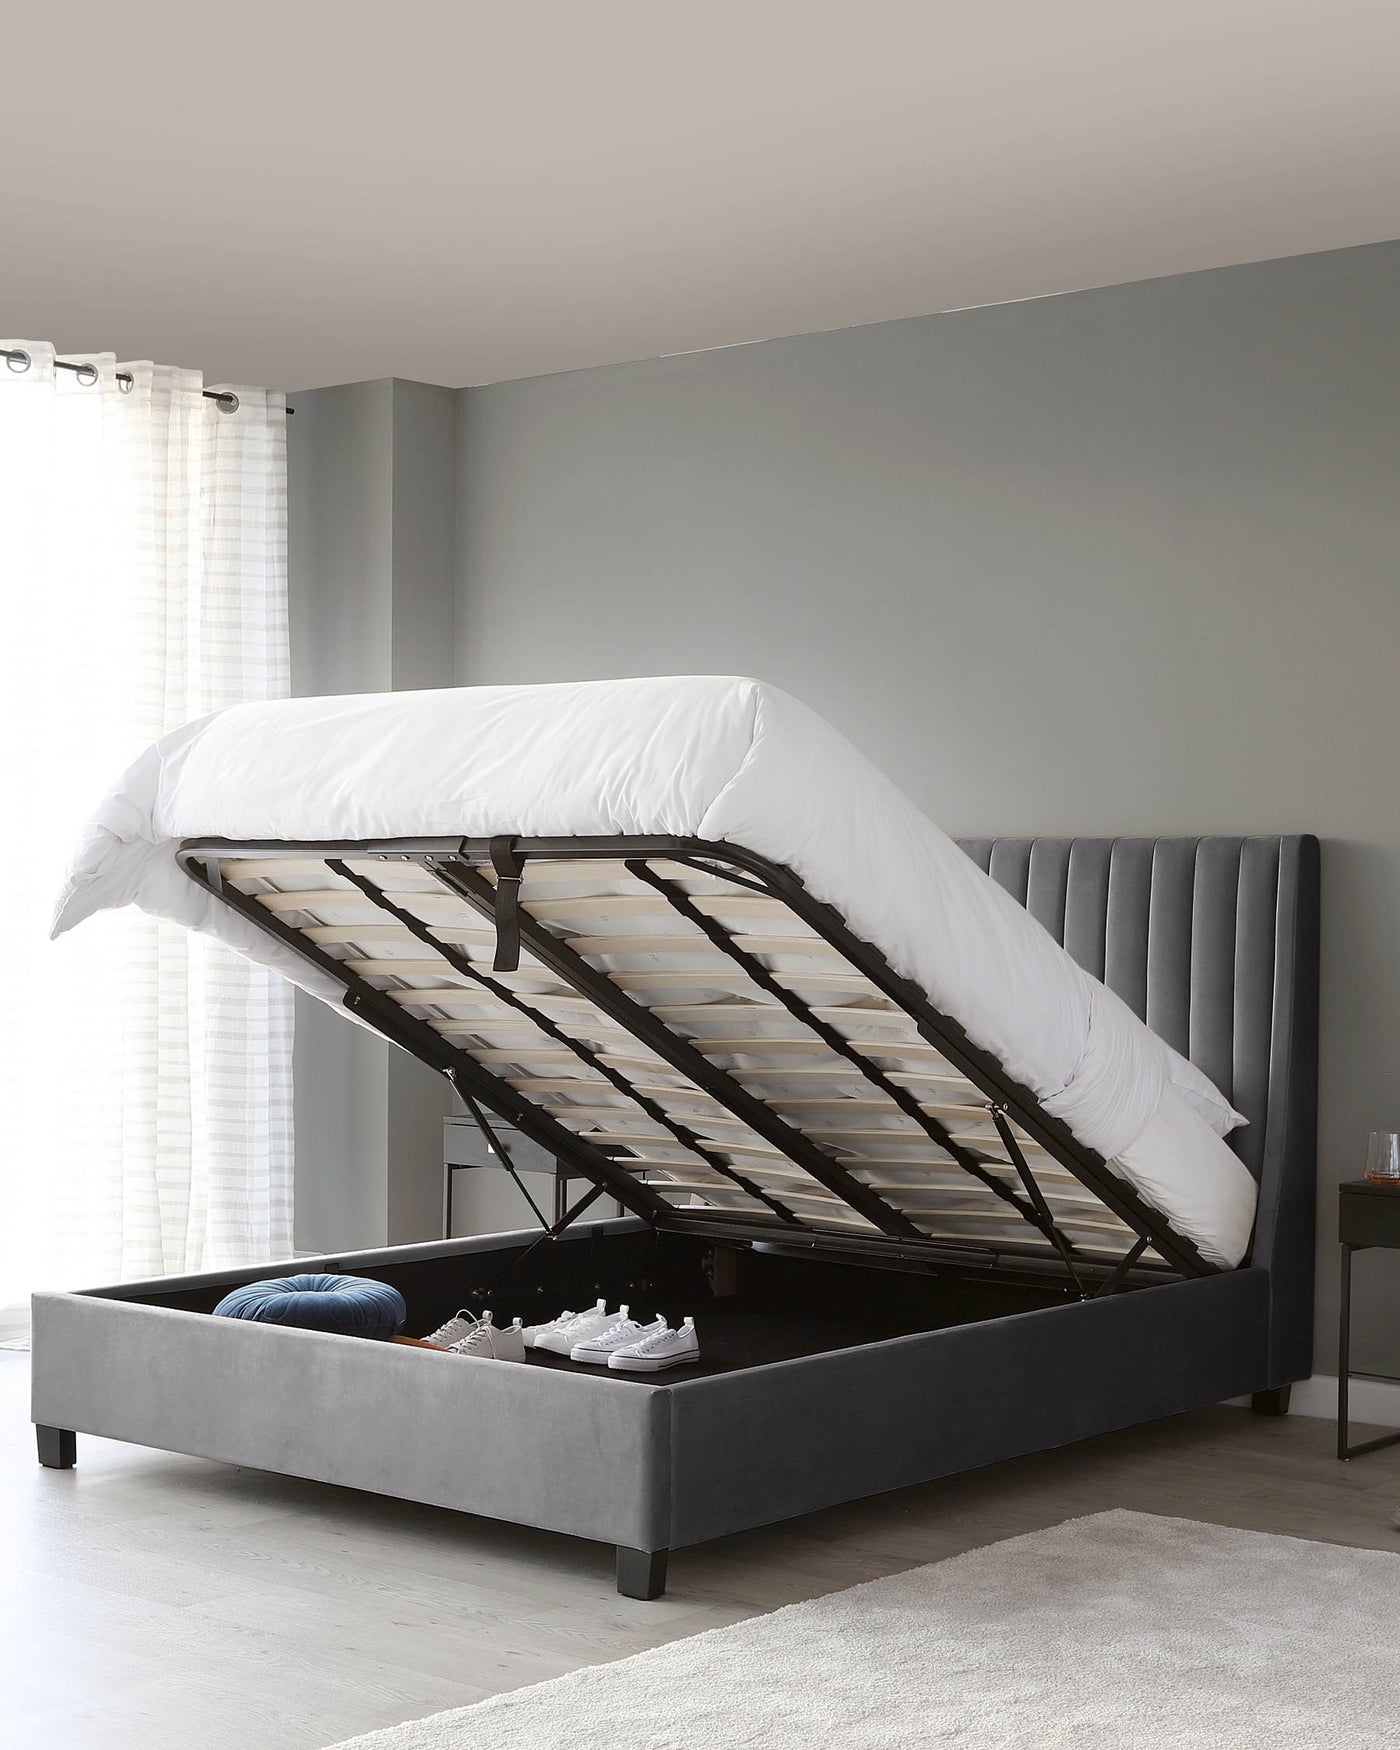 A modern grey upholstered storage bed with a tufted headboard. The bed frame includes a gas-lift mechanism that allows the mattress to be easily raised, revealing a spacious storage area underneath, ideal for storing bedding and out-of-season clothing.